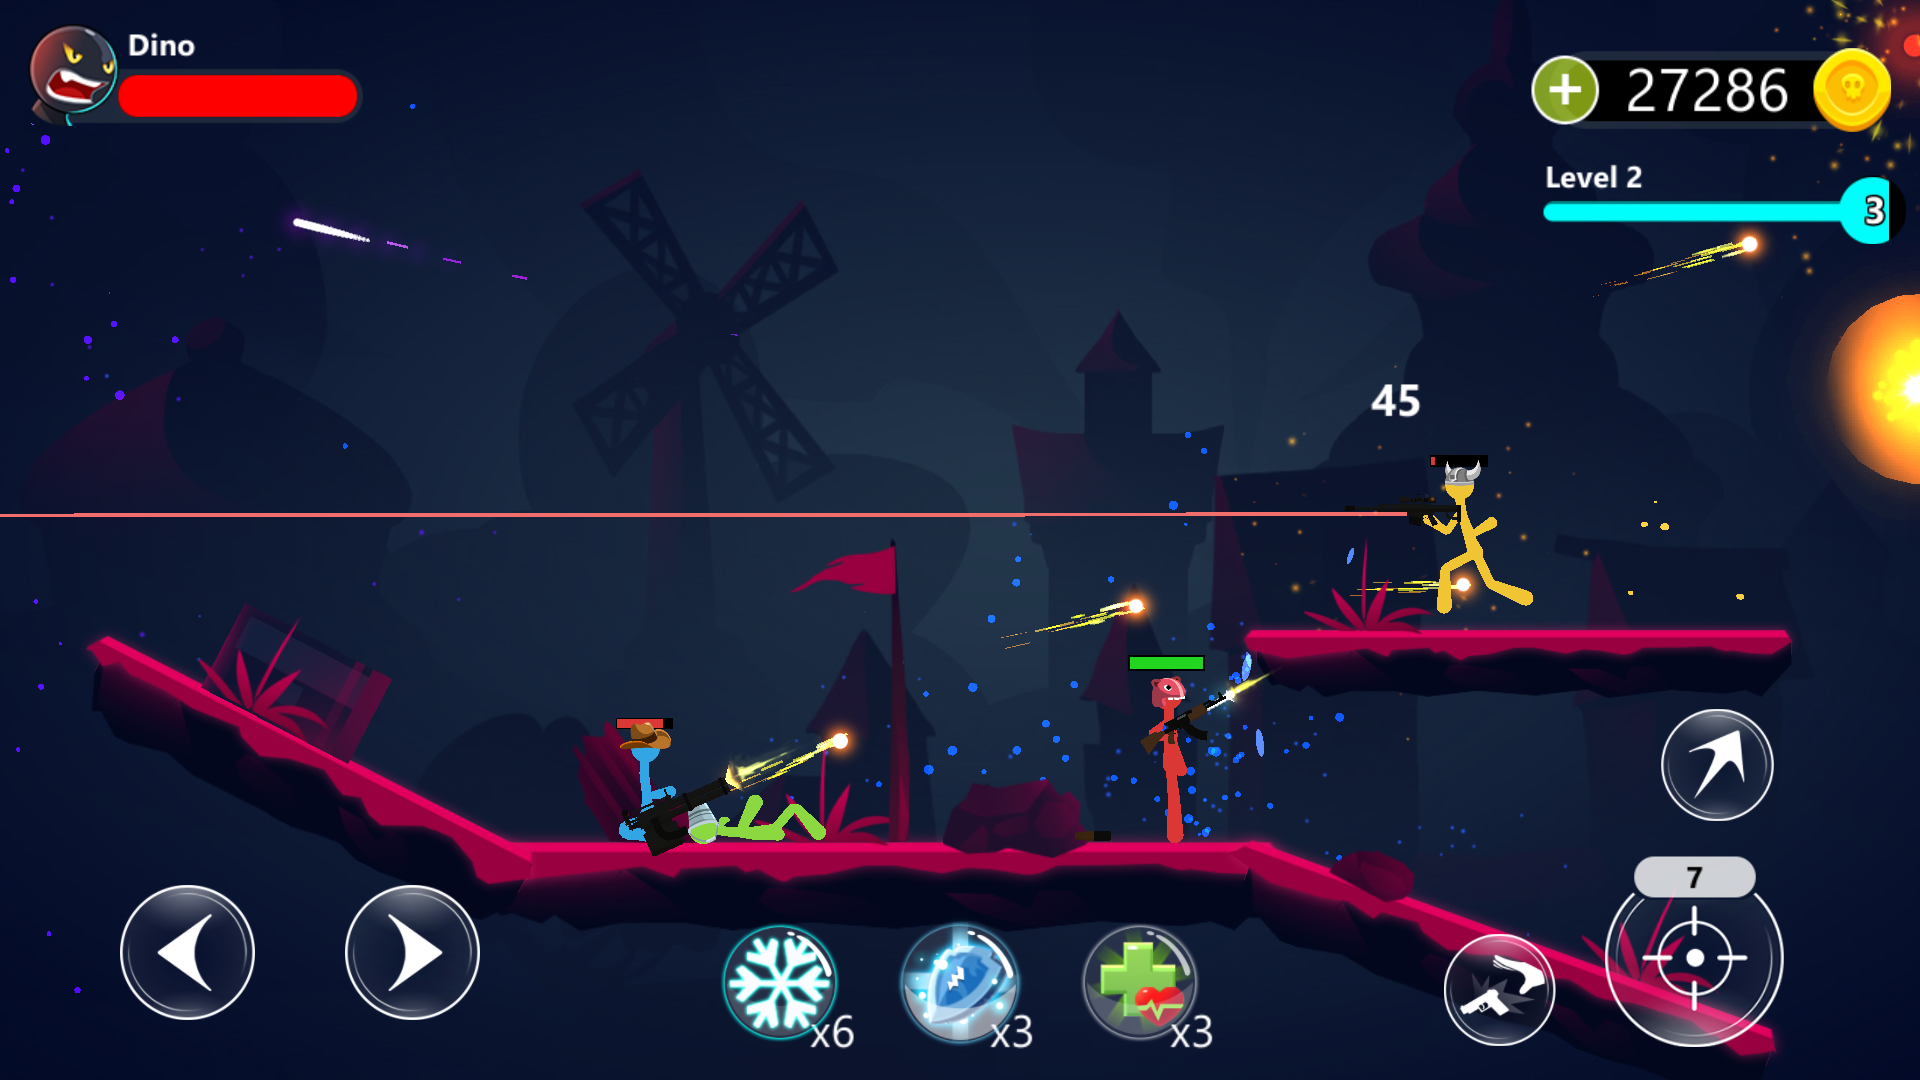 Download Ultimate Stick Fight APK v1.7 for Android